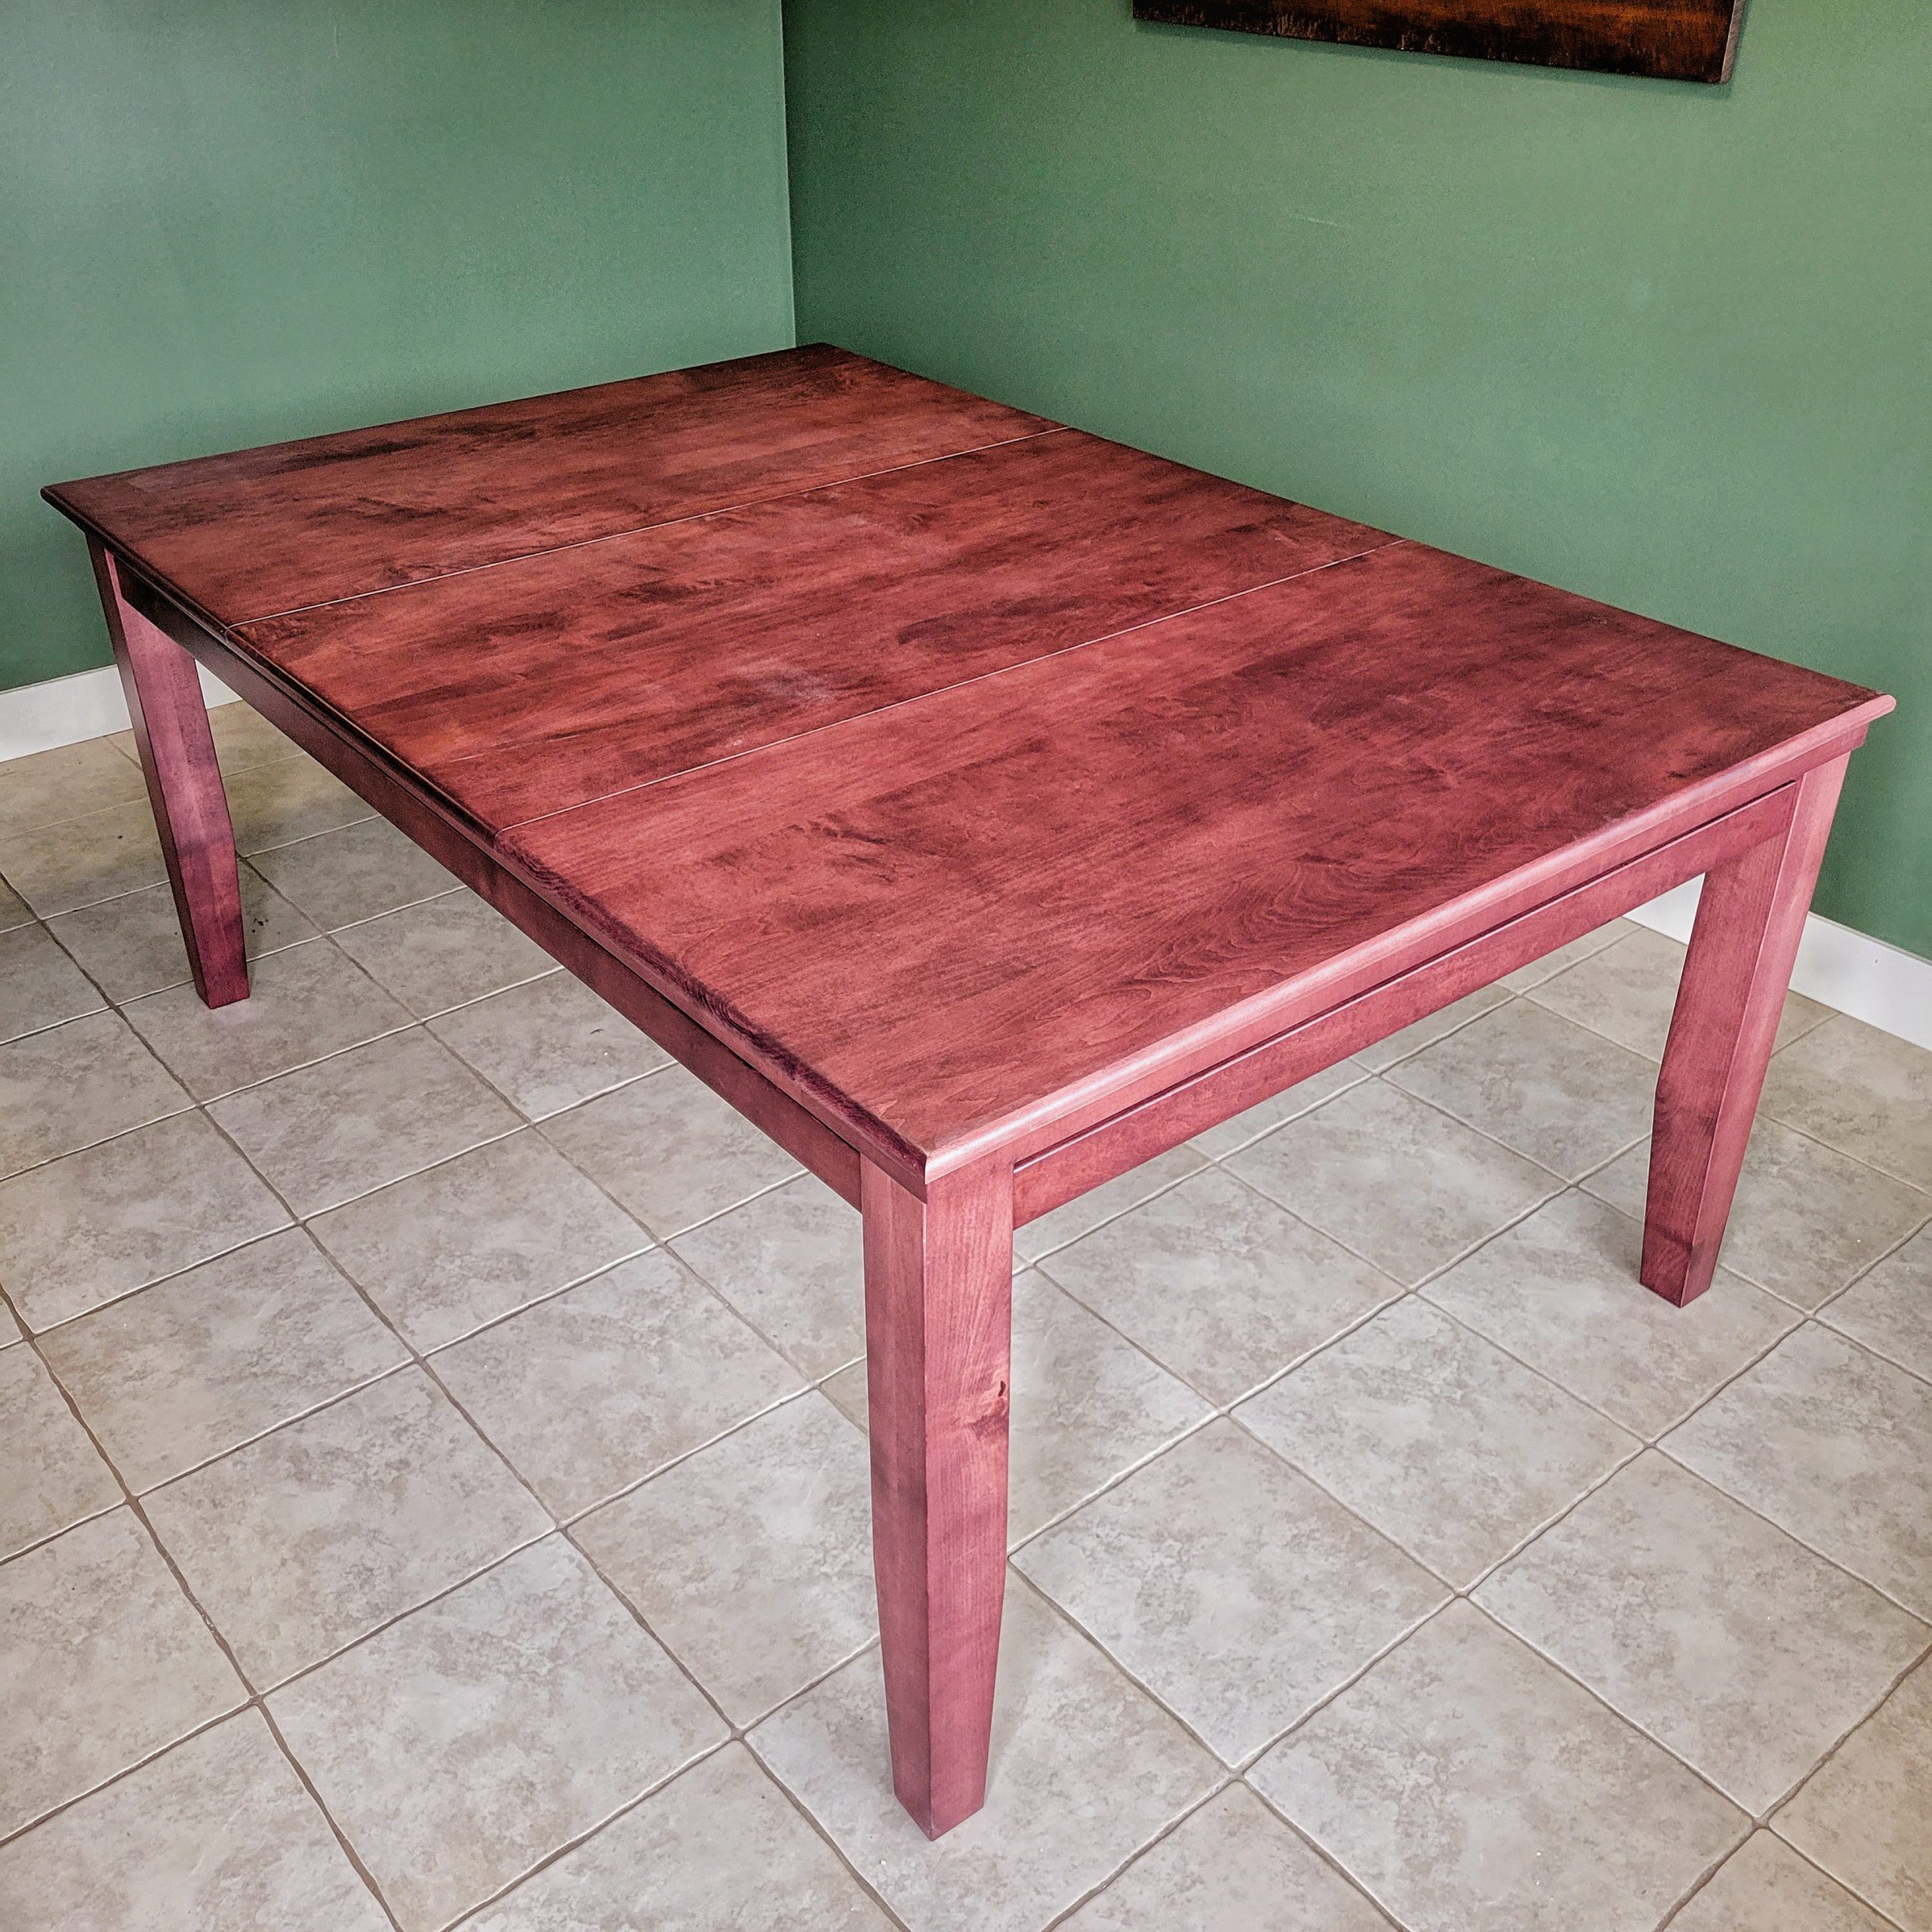 Stained board game table